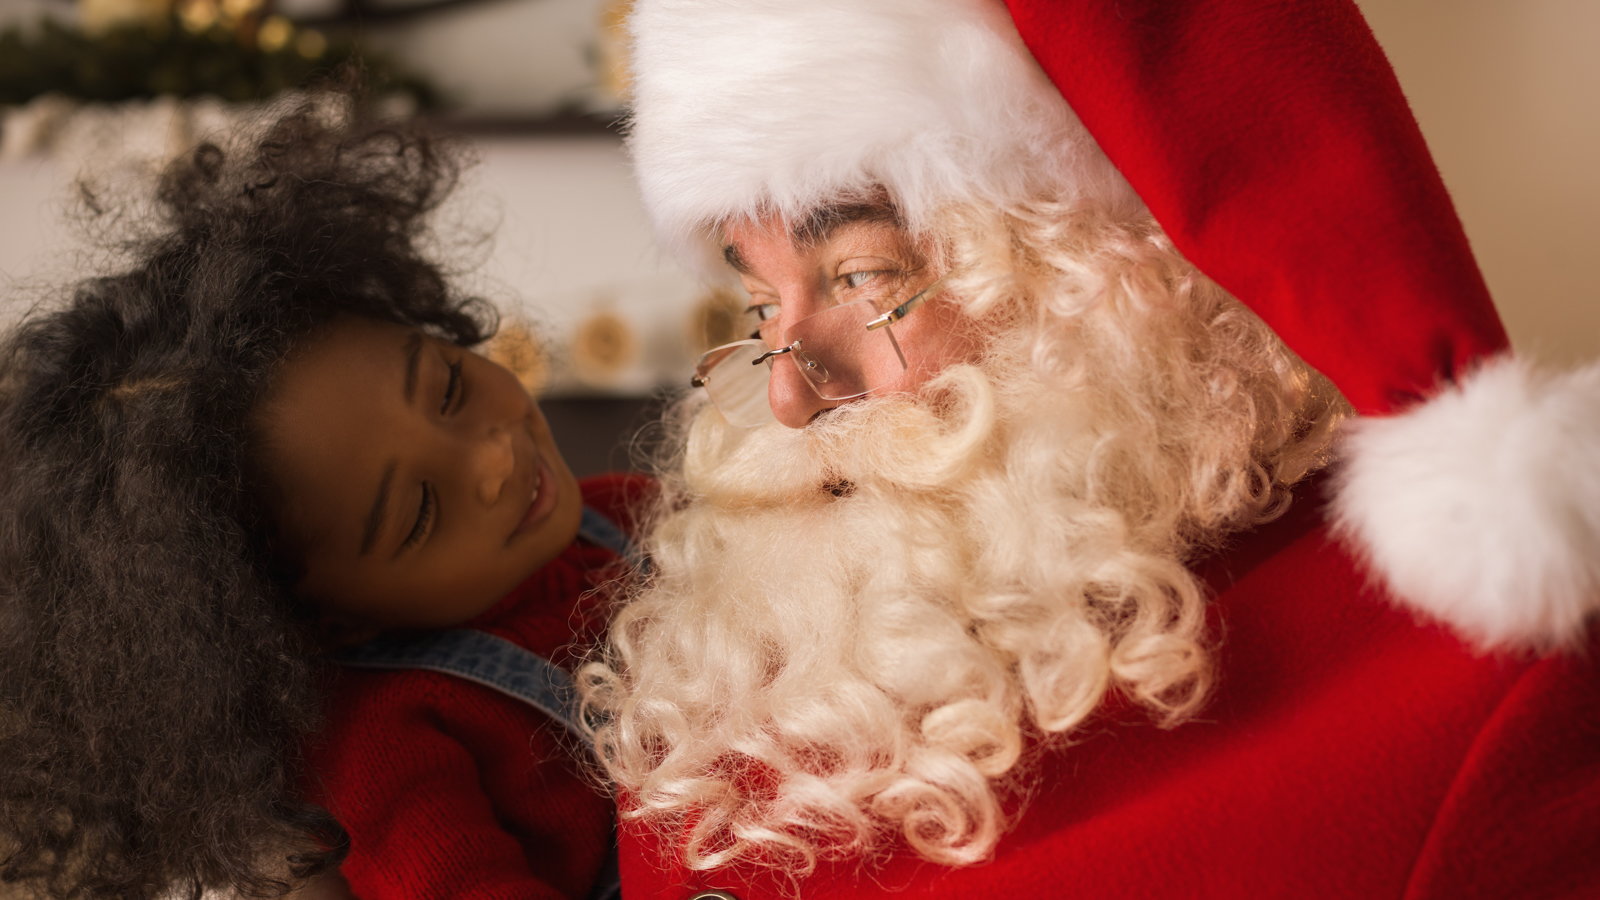 When Should You Tell Your Kids the Truth about Santa Claus